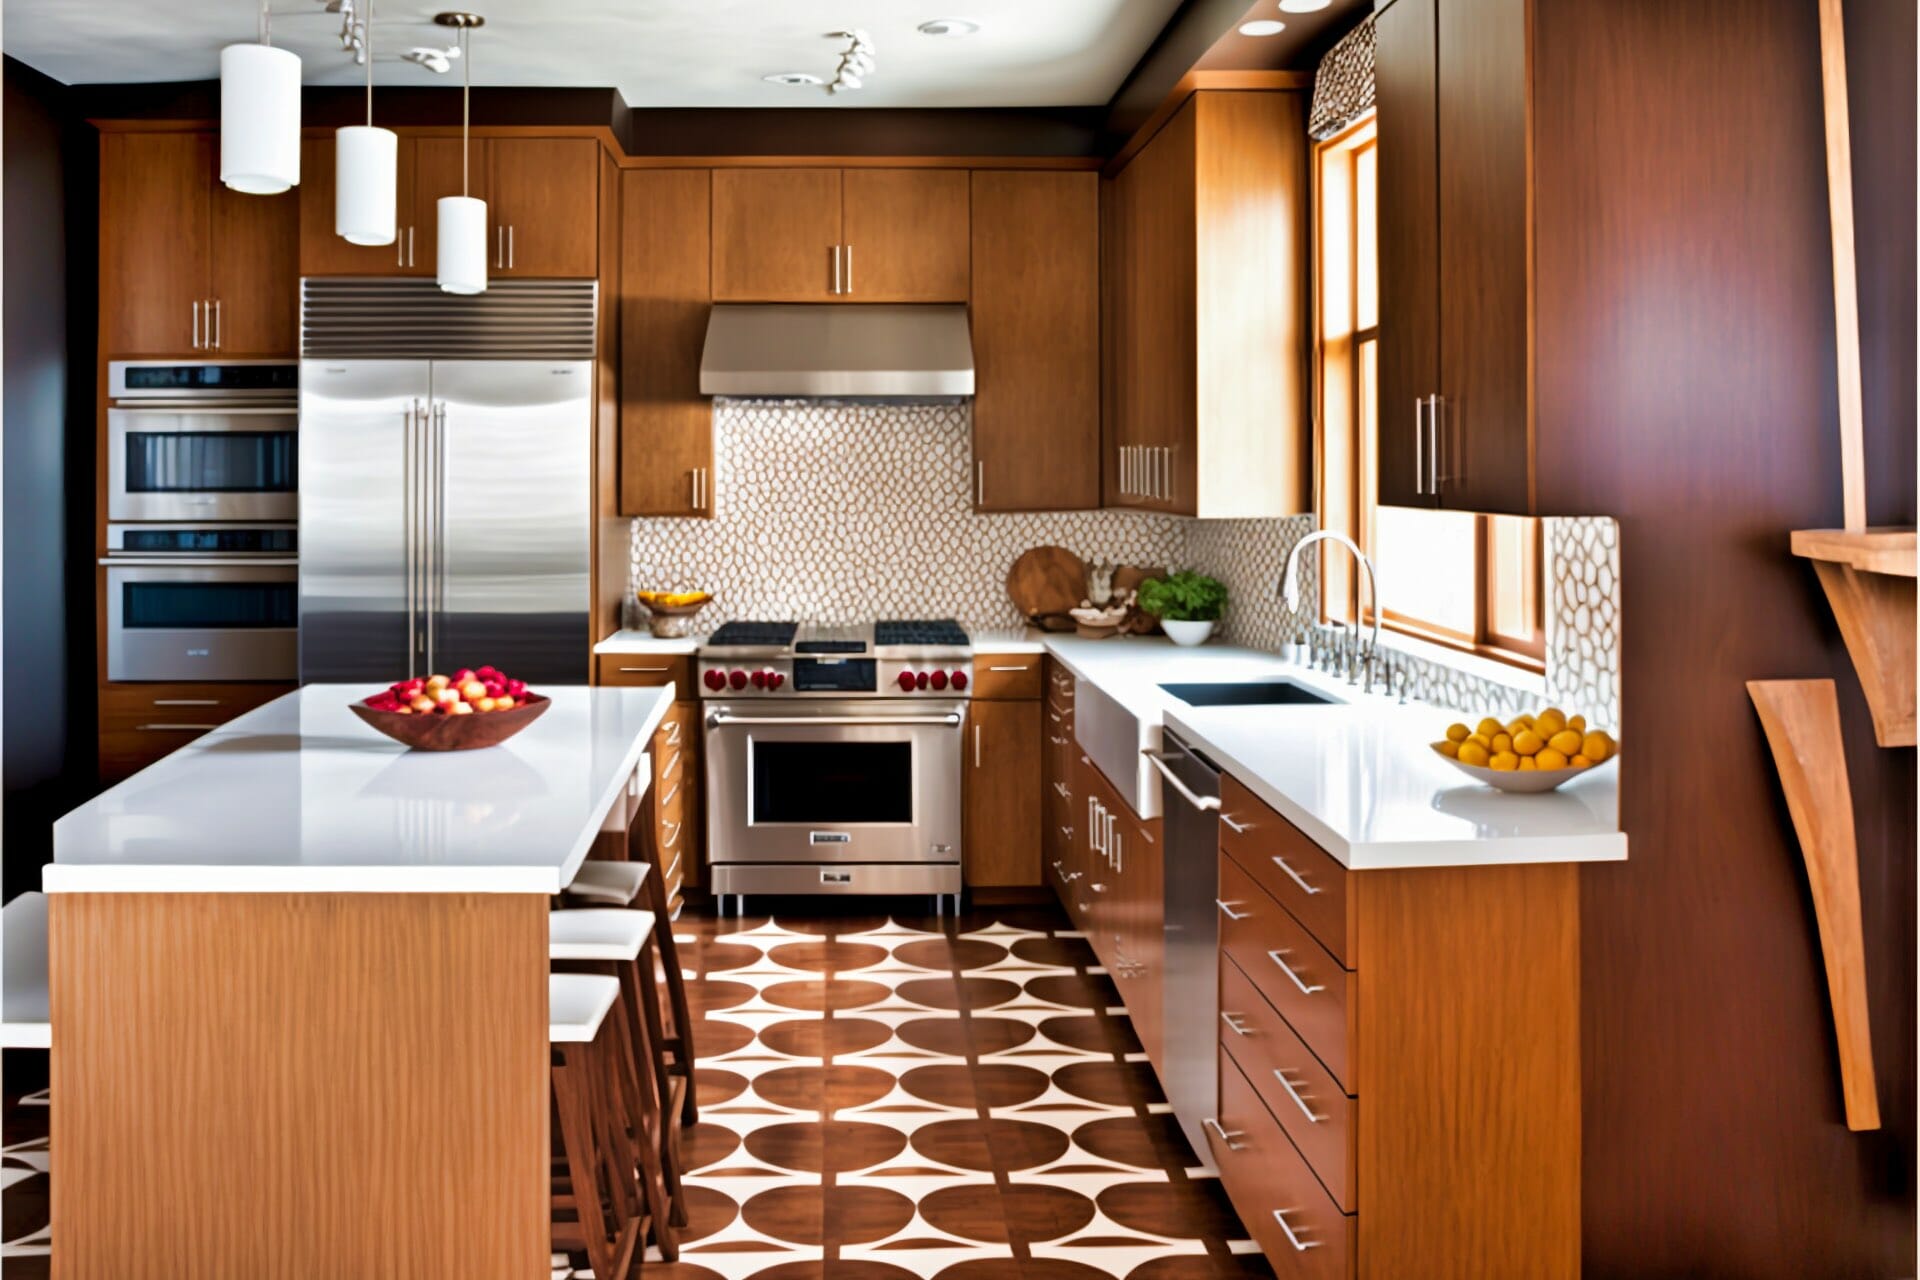 A Unique, Modern Kitchen Featuring A Mix Of Oak, Cherry, And Maple Cabinetry, A Patterned Backsplash, And A Bright White Countertop.